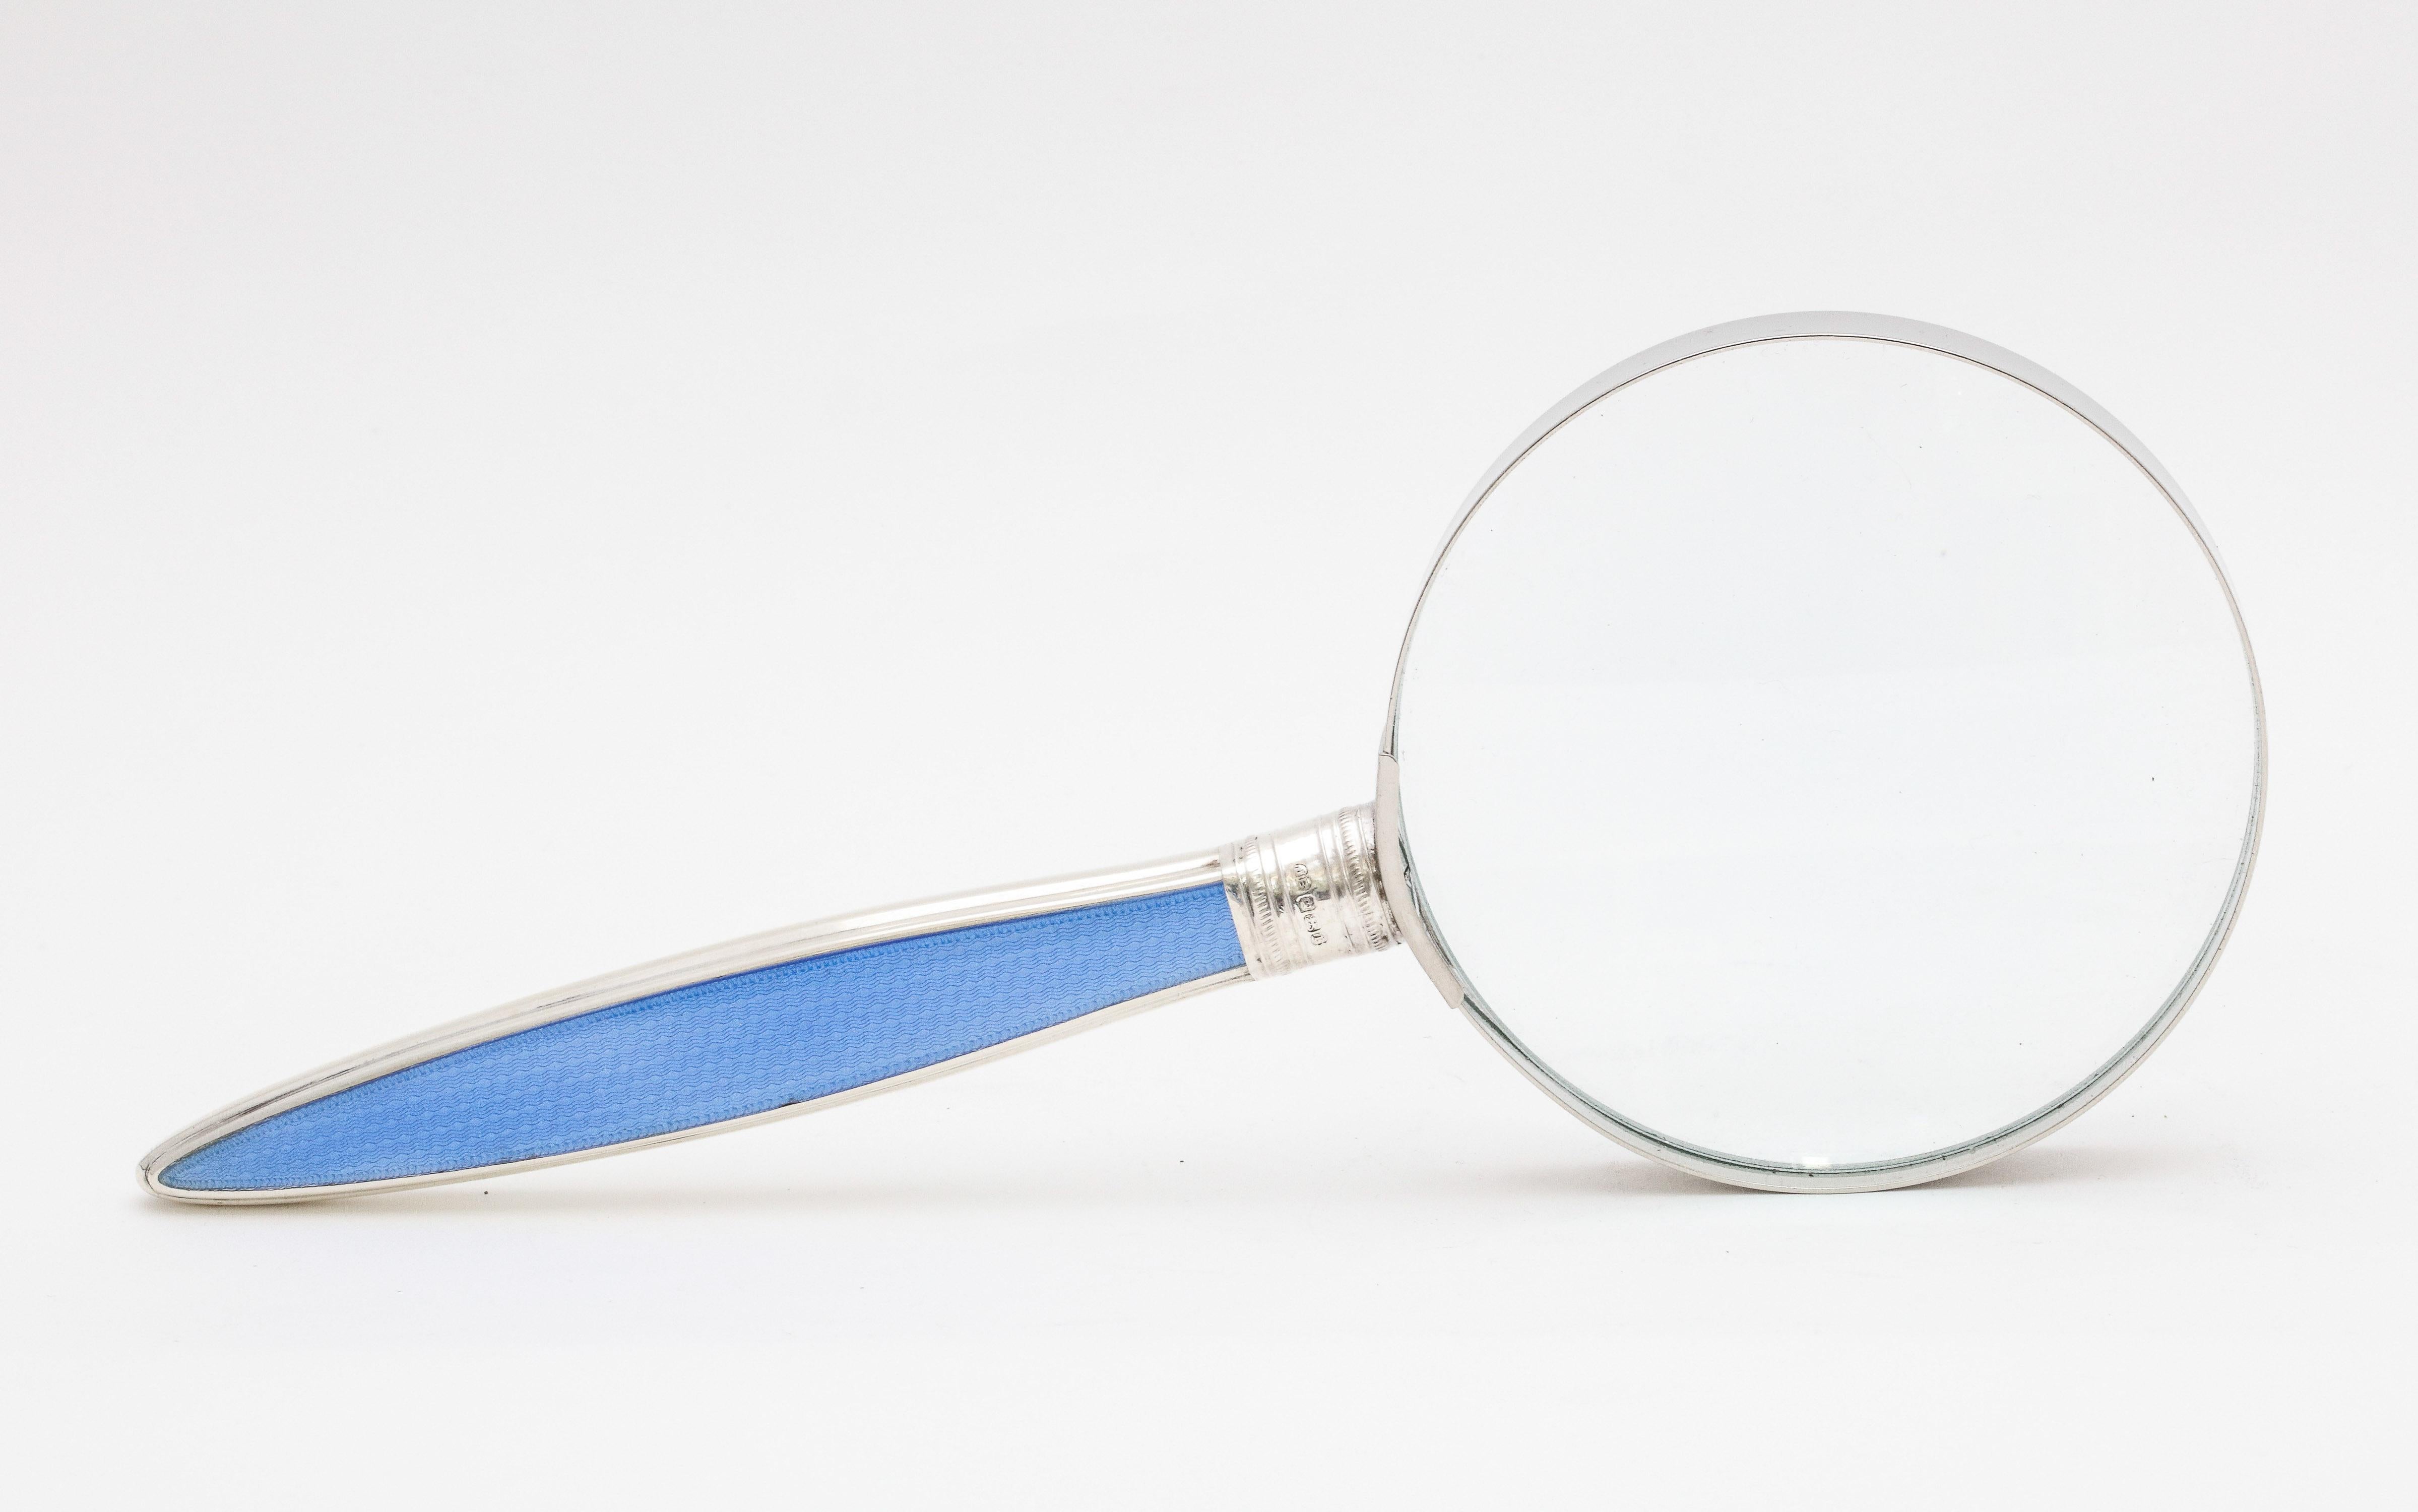 Large, Edwardian, sterling silver and blue guilloche enamel - mounted magnifying glass, Sheffield, England, year hallmarked for 1909, John Biggin - maker. Measures: 9 1/2 inches long x 3 3/4 inches in diameter across glass. Glass itself has a metal